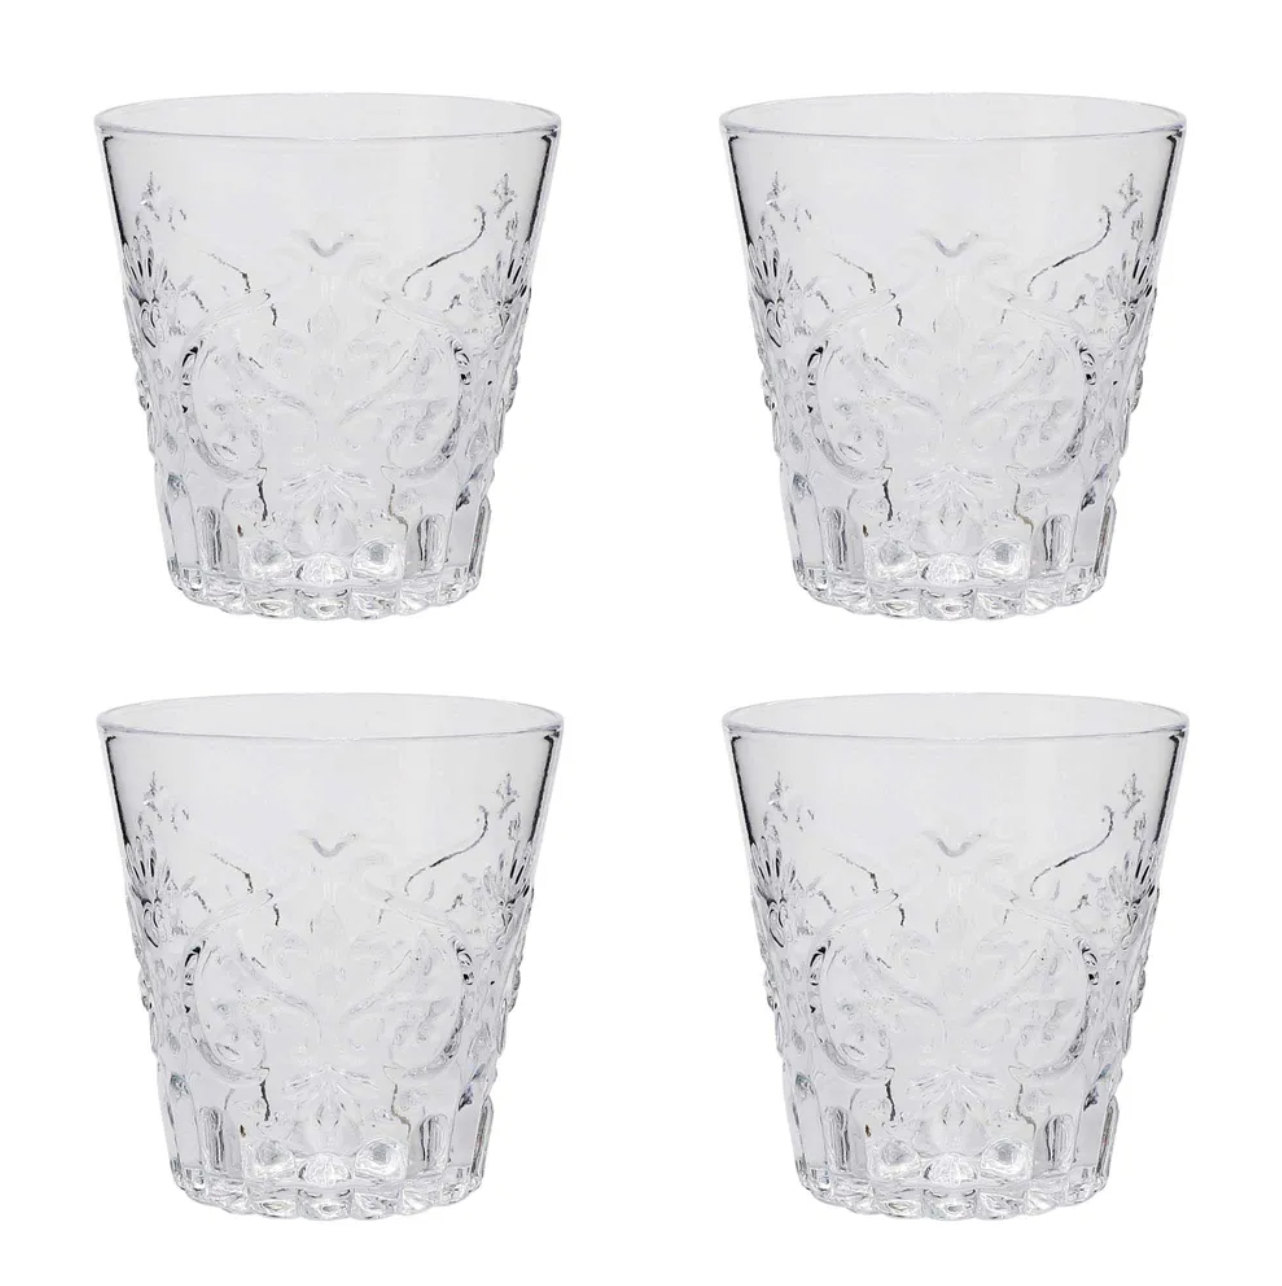 DRINKING GLASS SET OF 4 VALENTIA CLEAR 8OZ